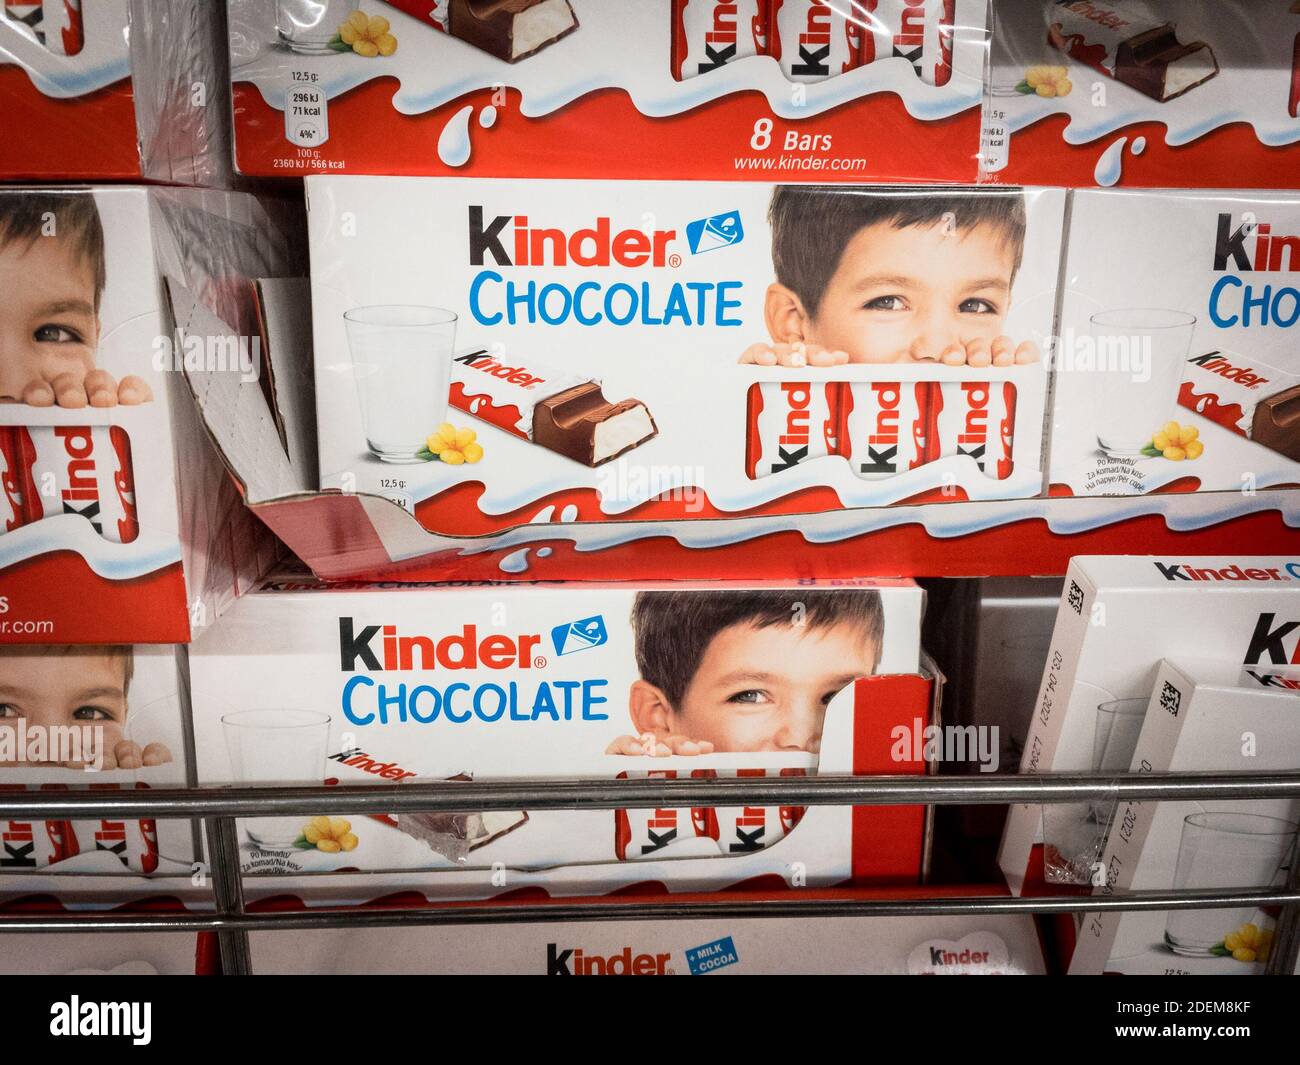 BELGRADE, SERBIA - NOVEMBER 8, 2020: Kinder Chocolate logo on some of their  chocolate bars for sale. Kinder is a confectionery brand belonging to the  Stock Photo - Alamy